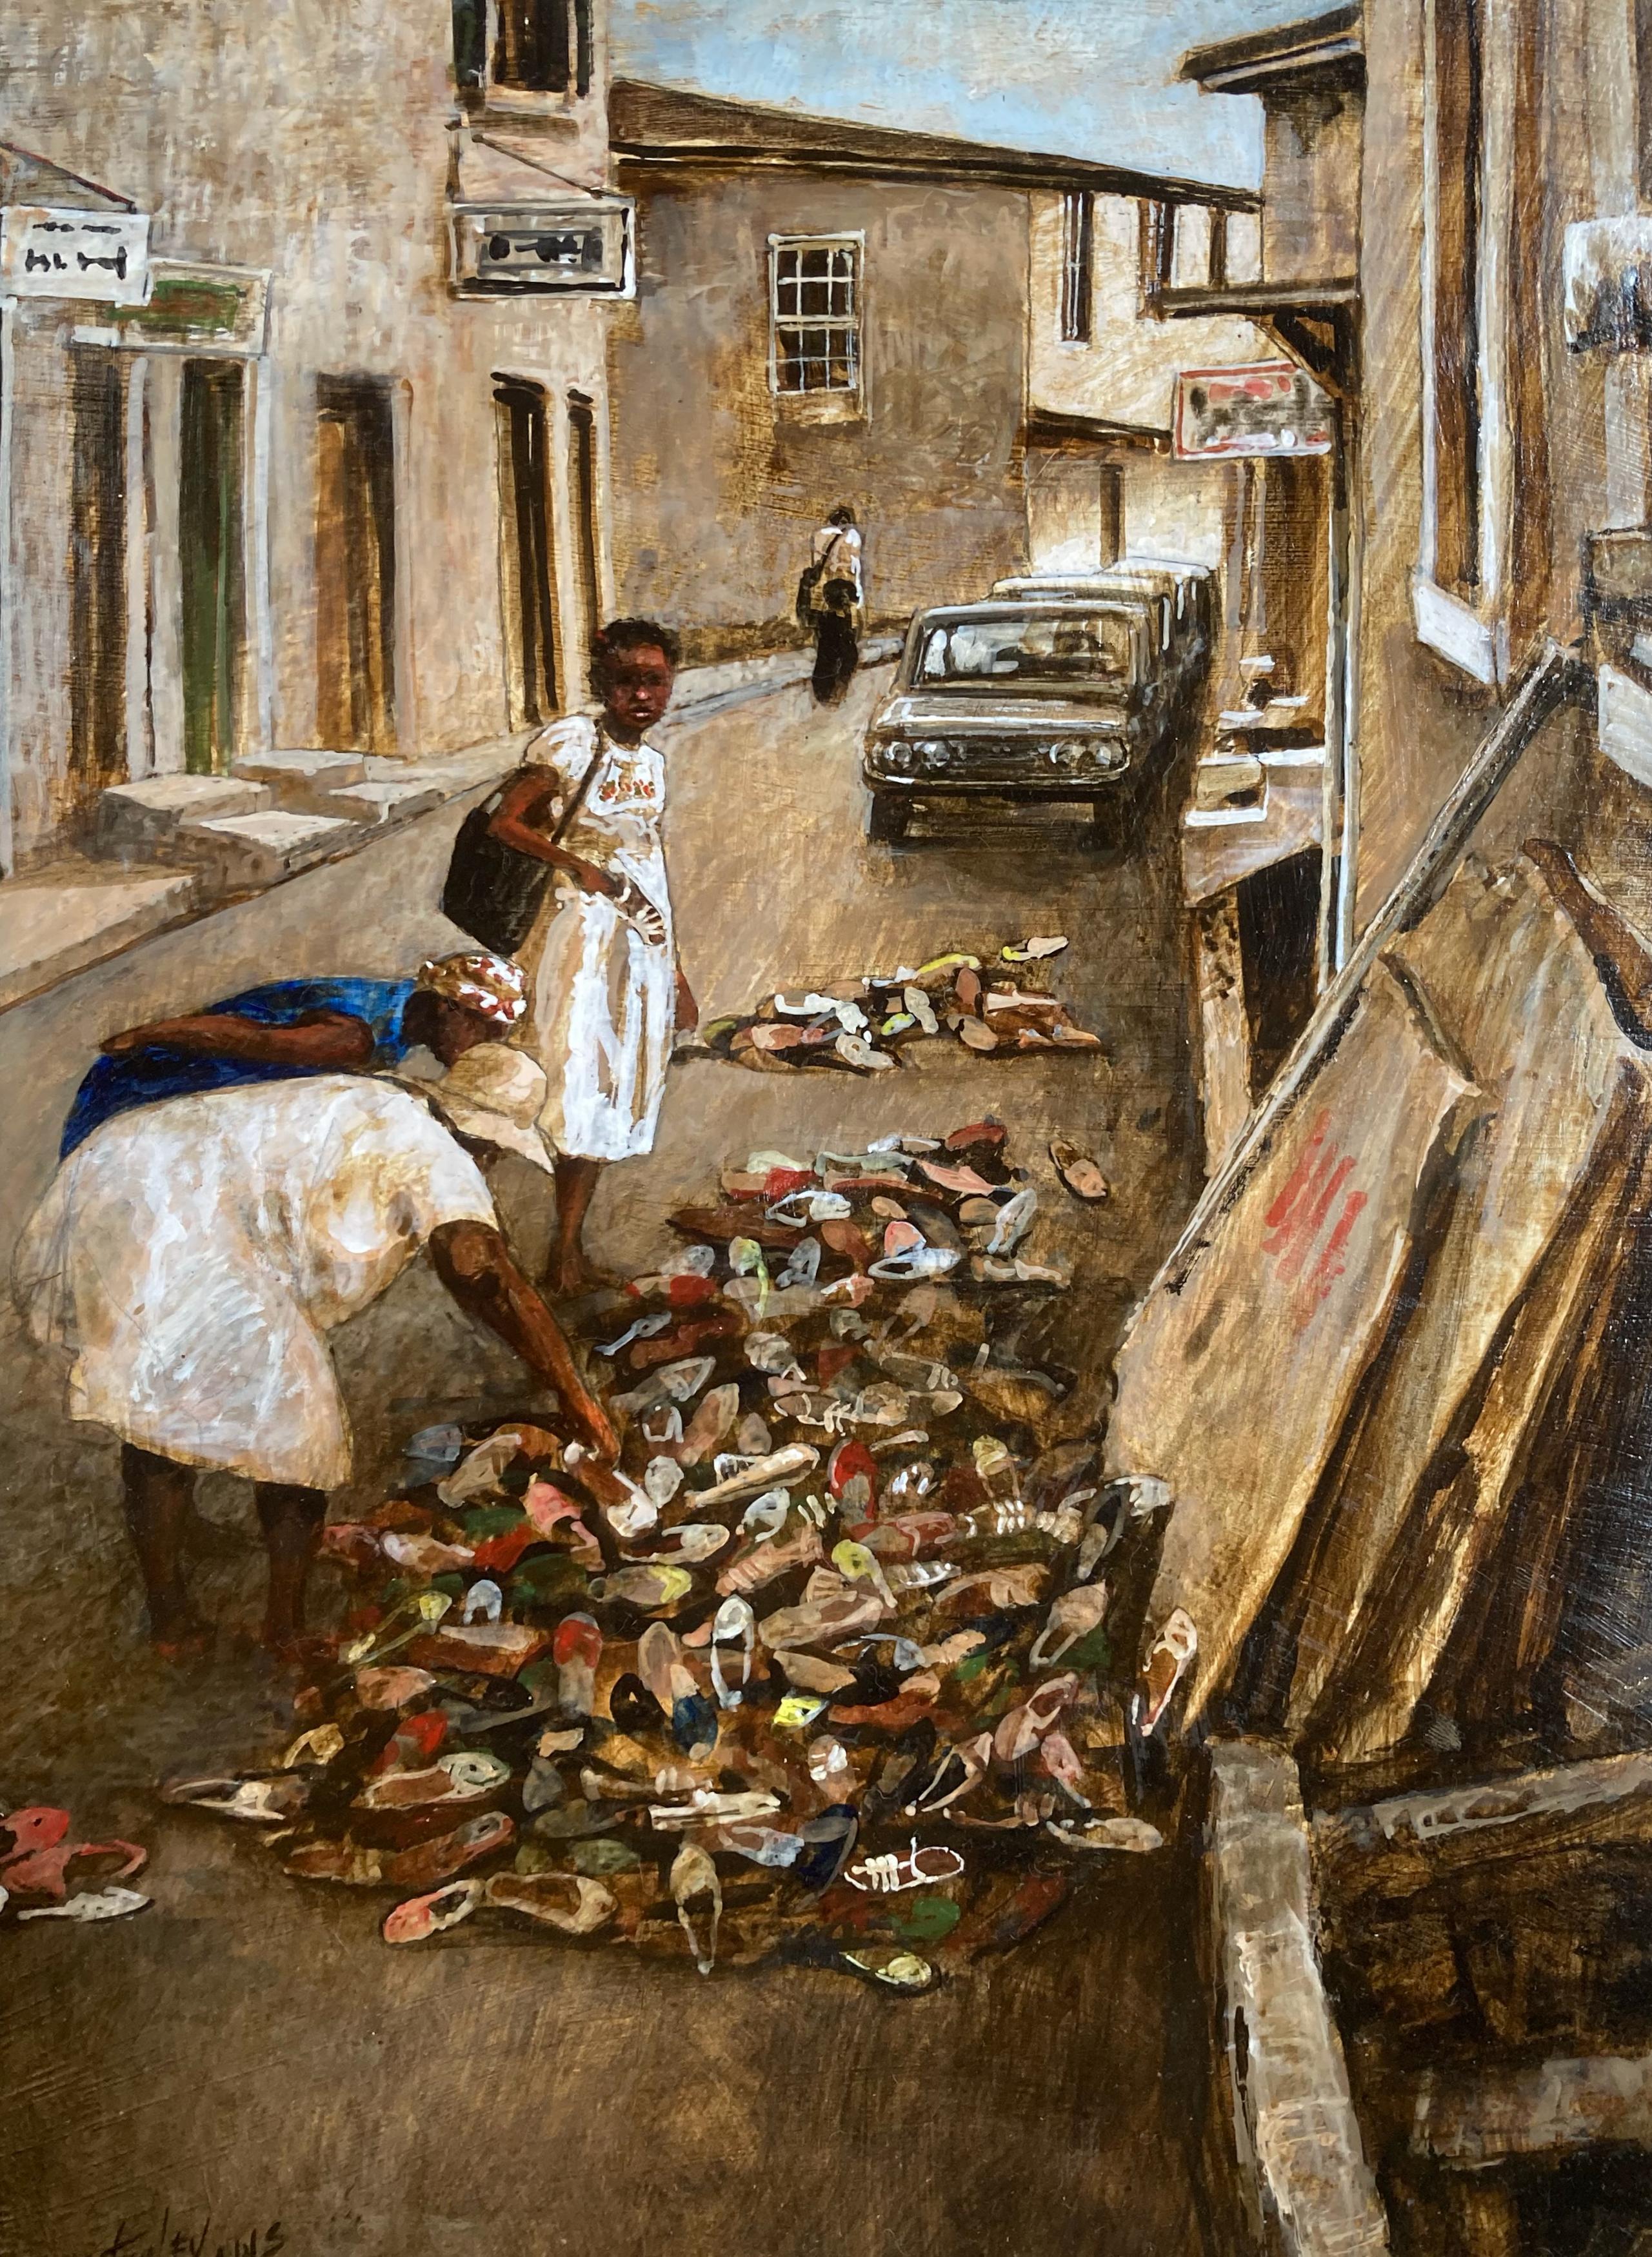 Donny Finley Figurative Painting - "Shoes" - Late 20th Century City Figure Painting